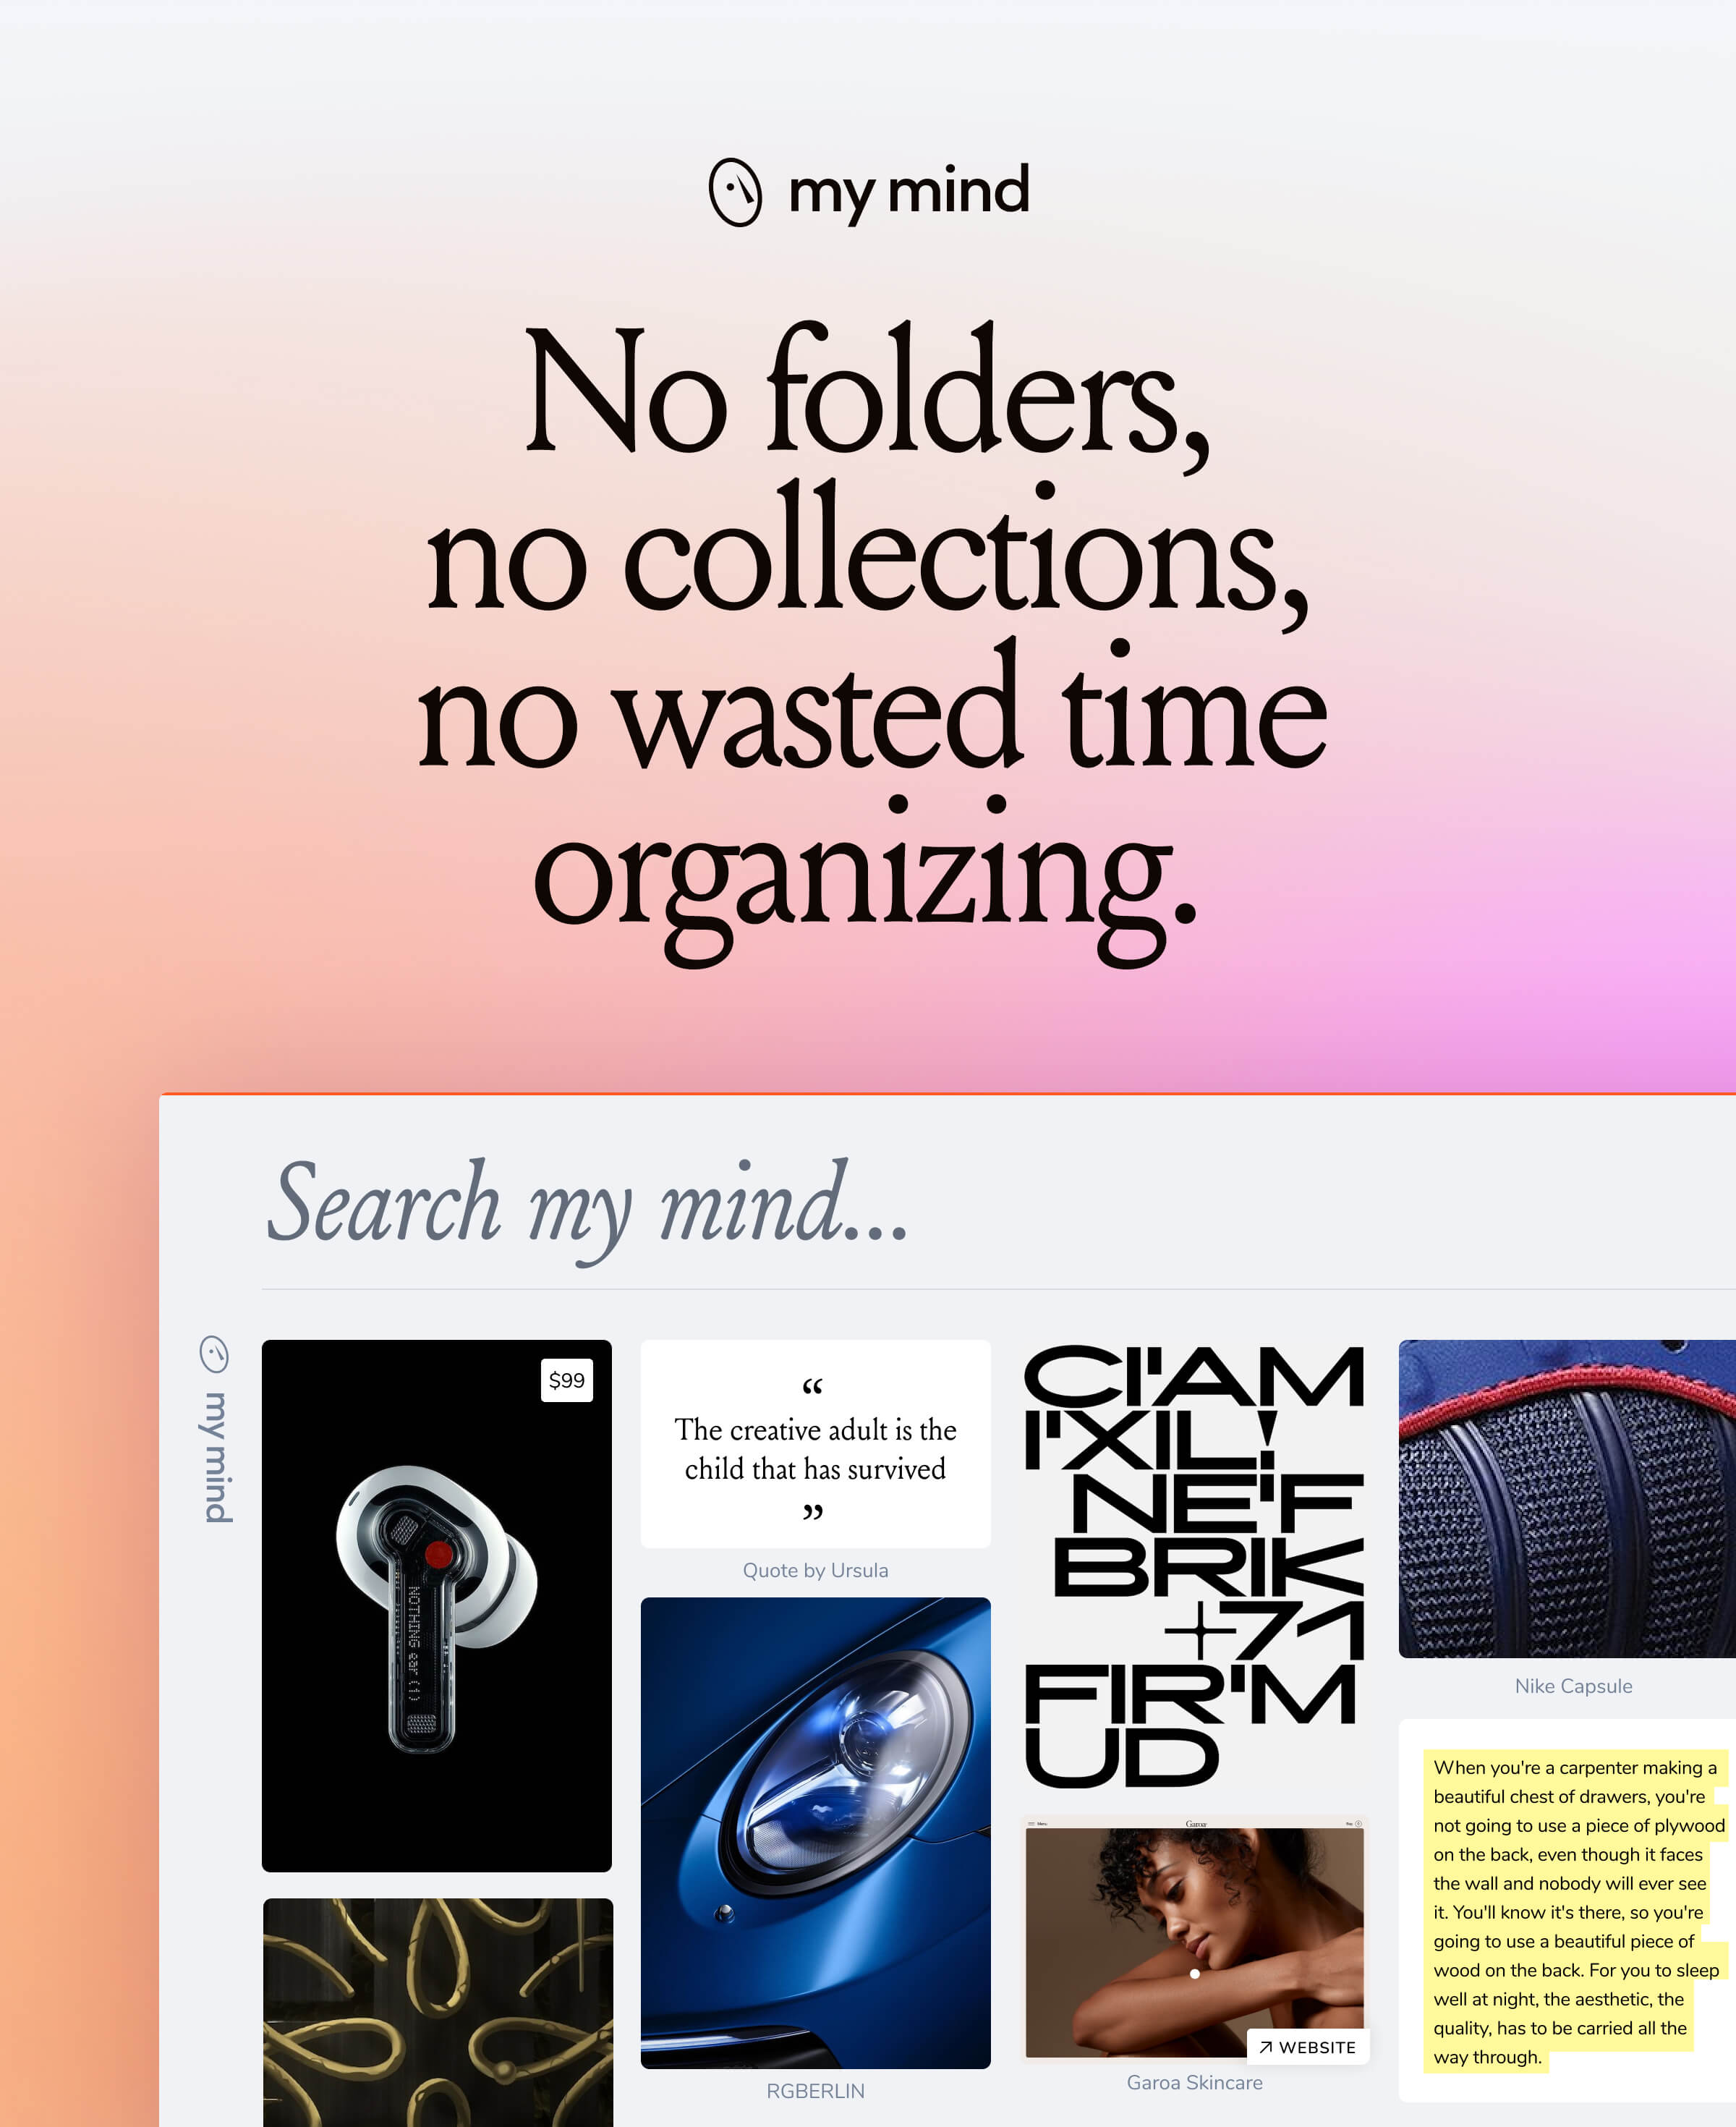 mymind: No folders, no collections, no wasted time organizing.